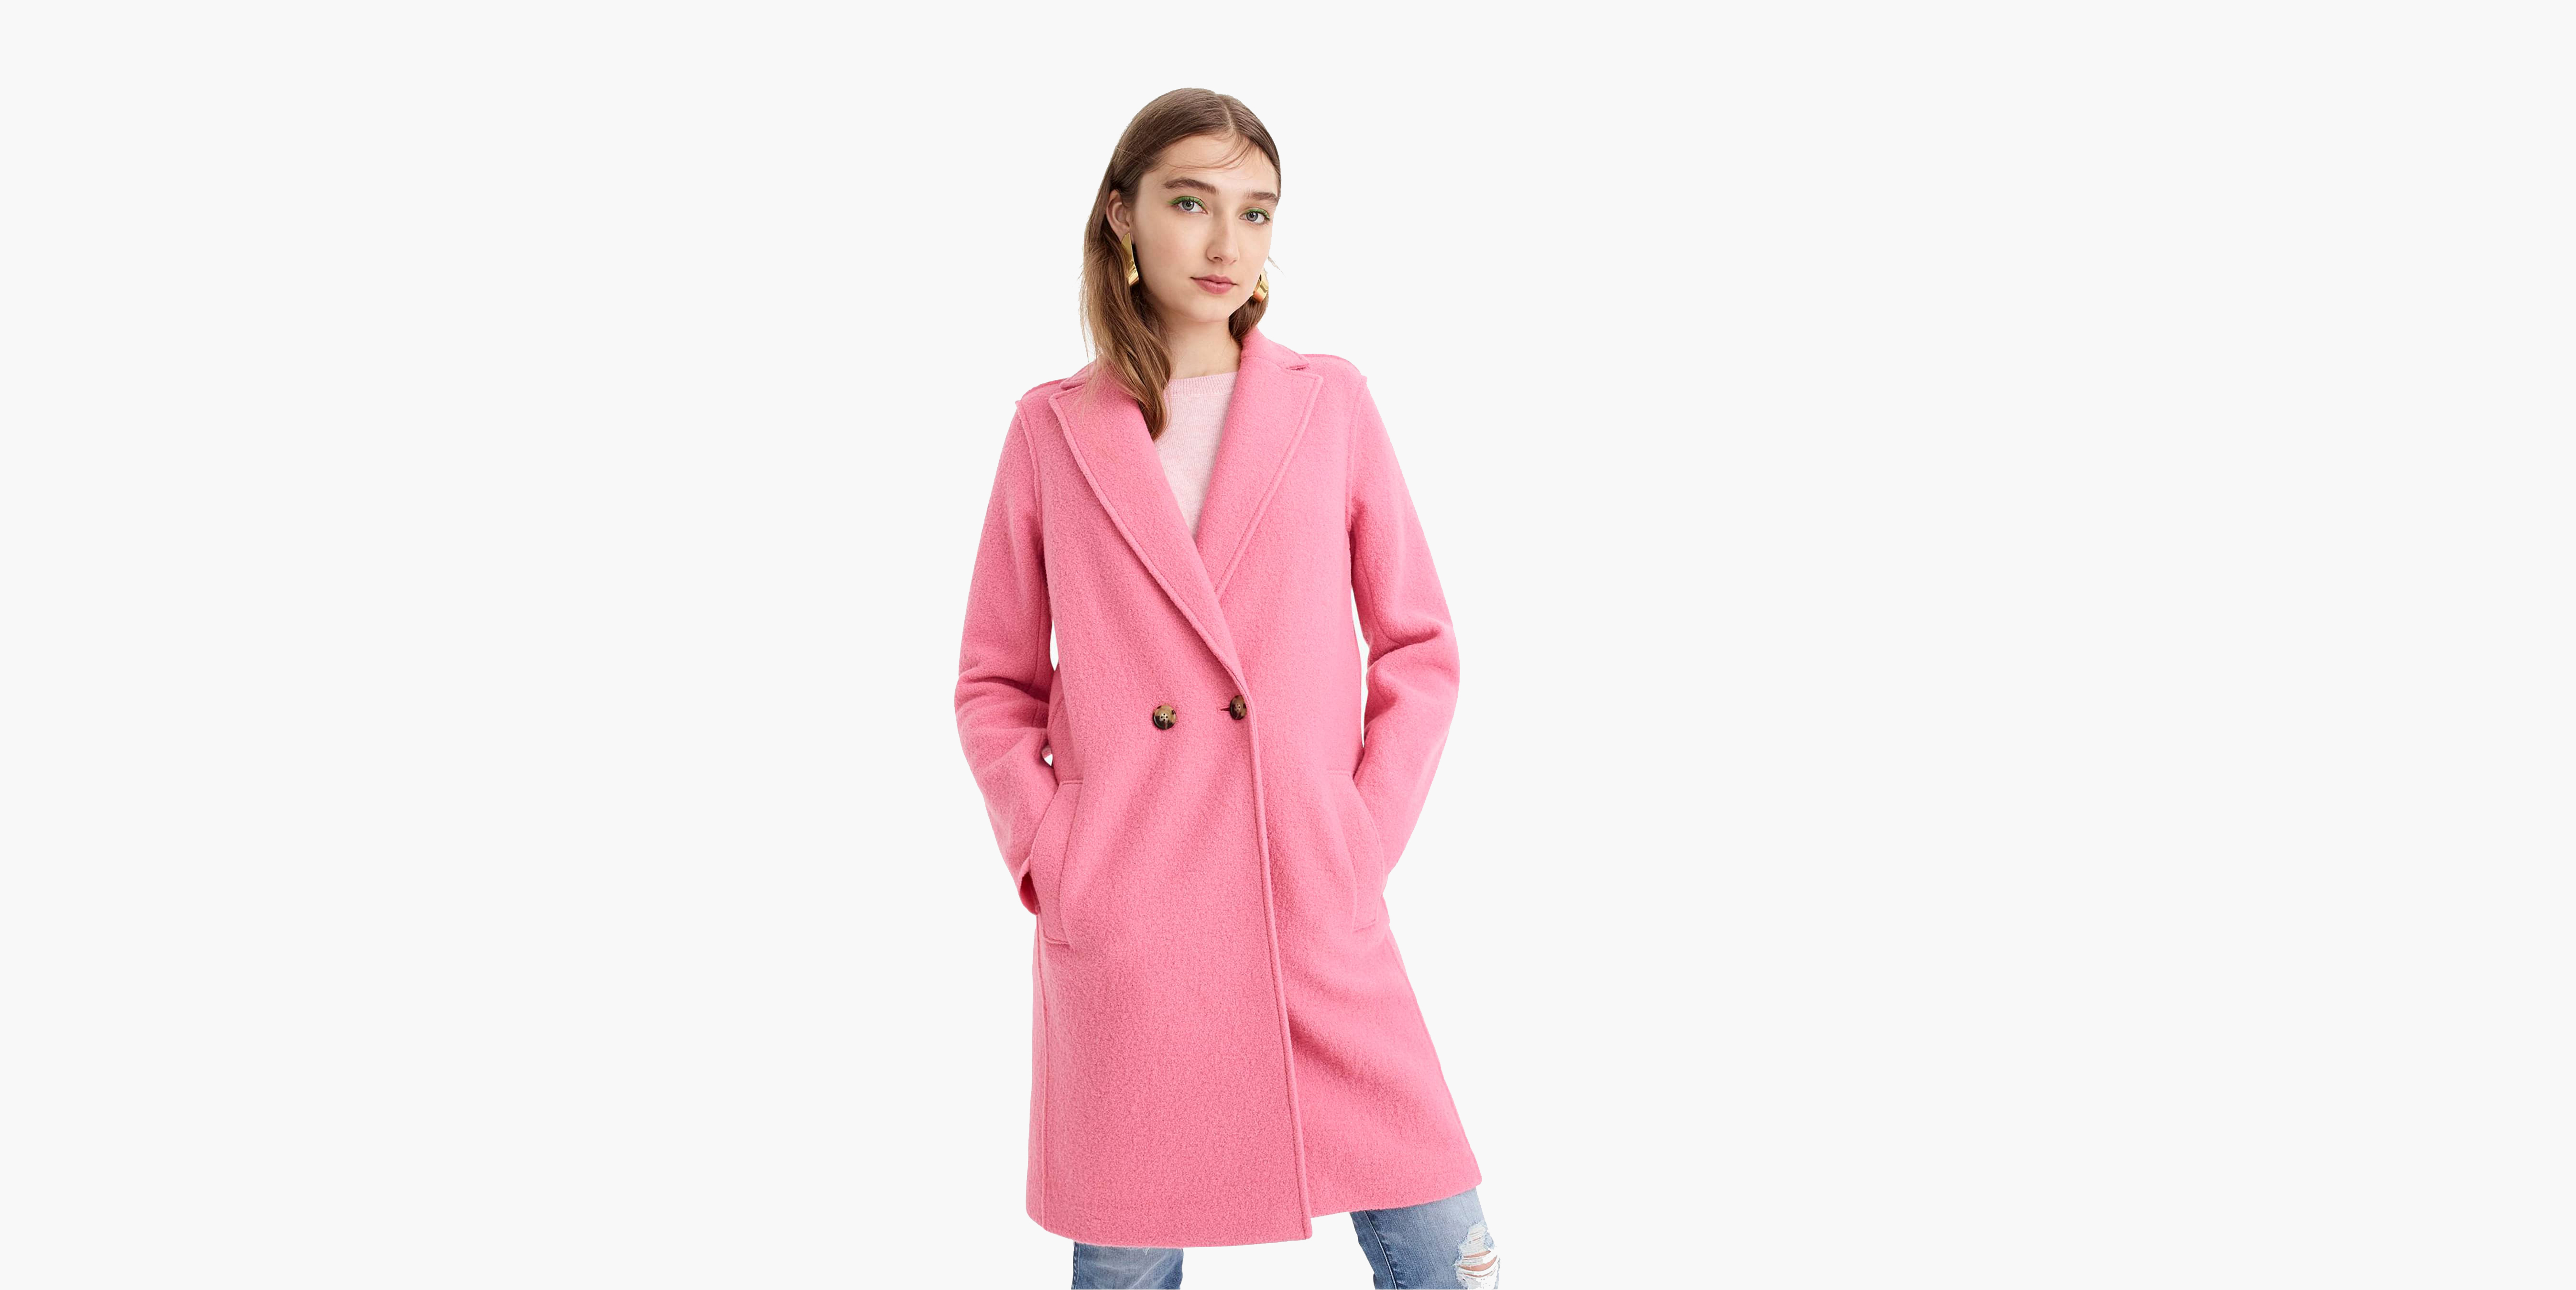 Nordstrom Half-Yearly Sale 2018: Shop Our Favorite J.Crew Coat